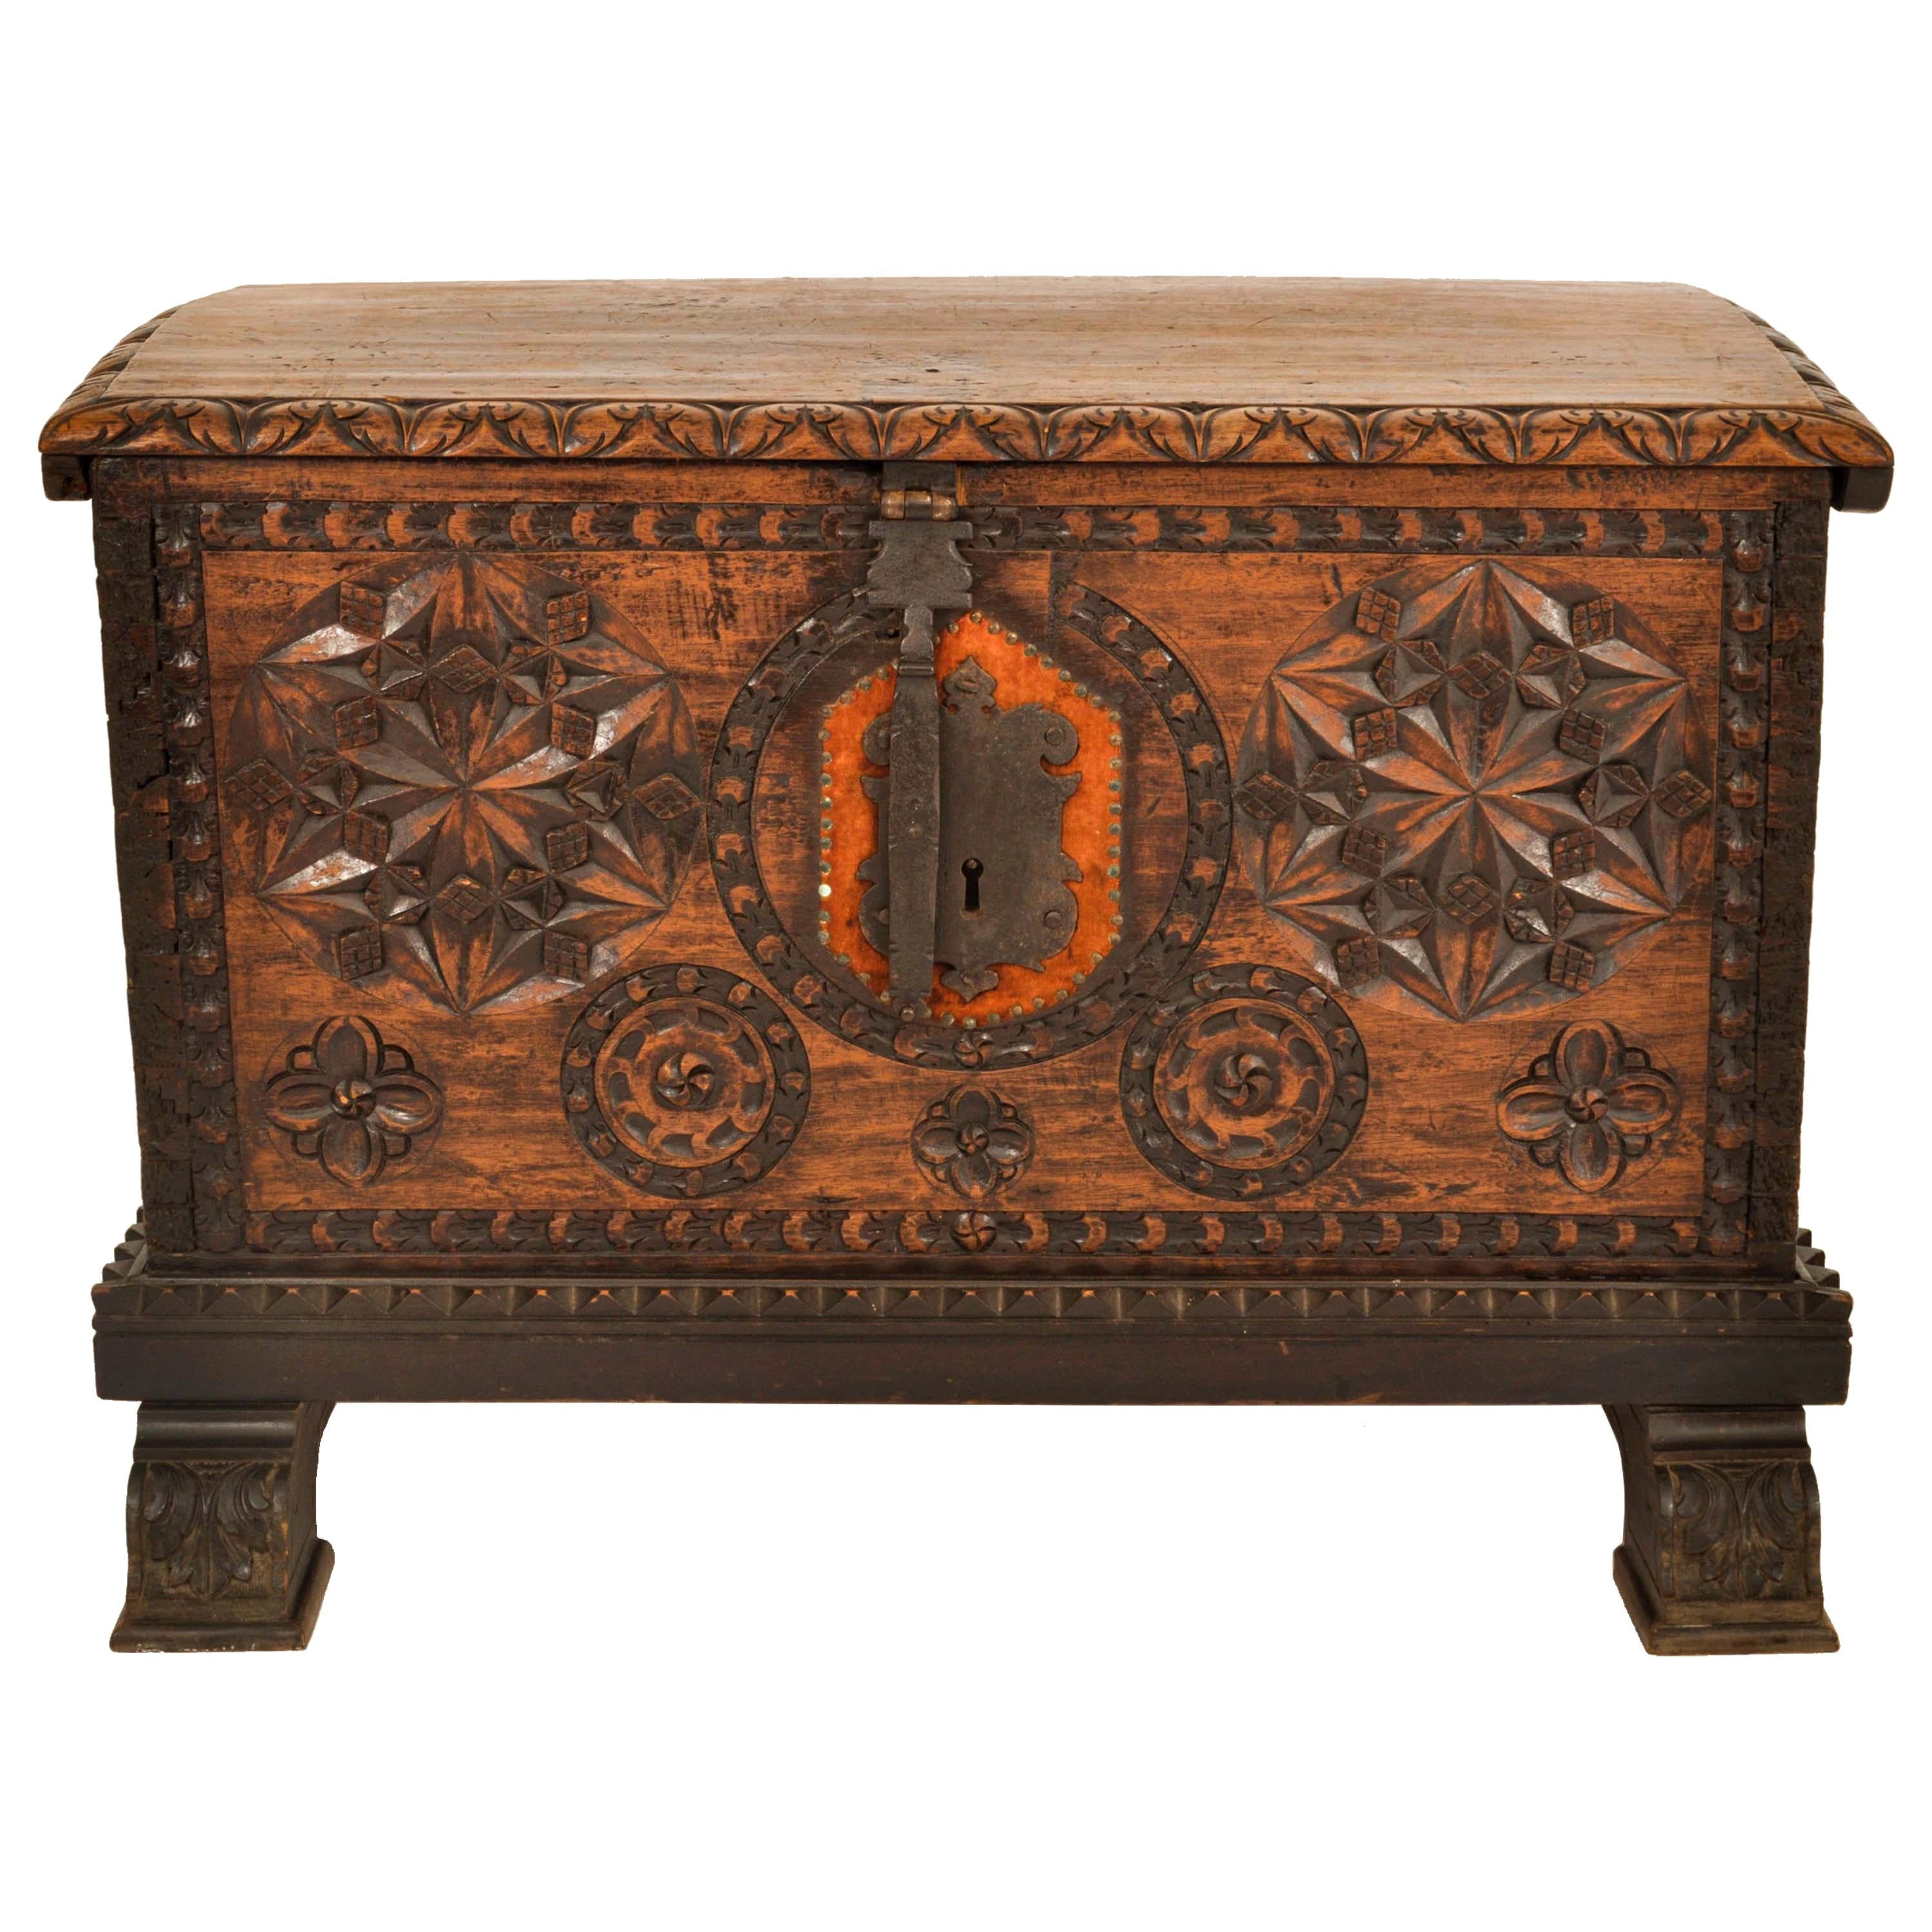 Late 18th Century Antique Scandinavian Pine Baroque Folk Art Carved Dowry Chest Trunk Coffer 1780 For Sale